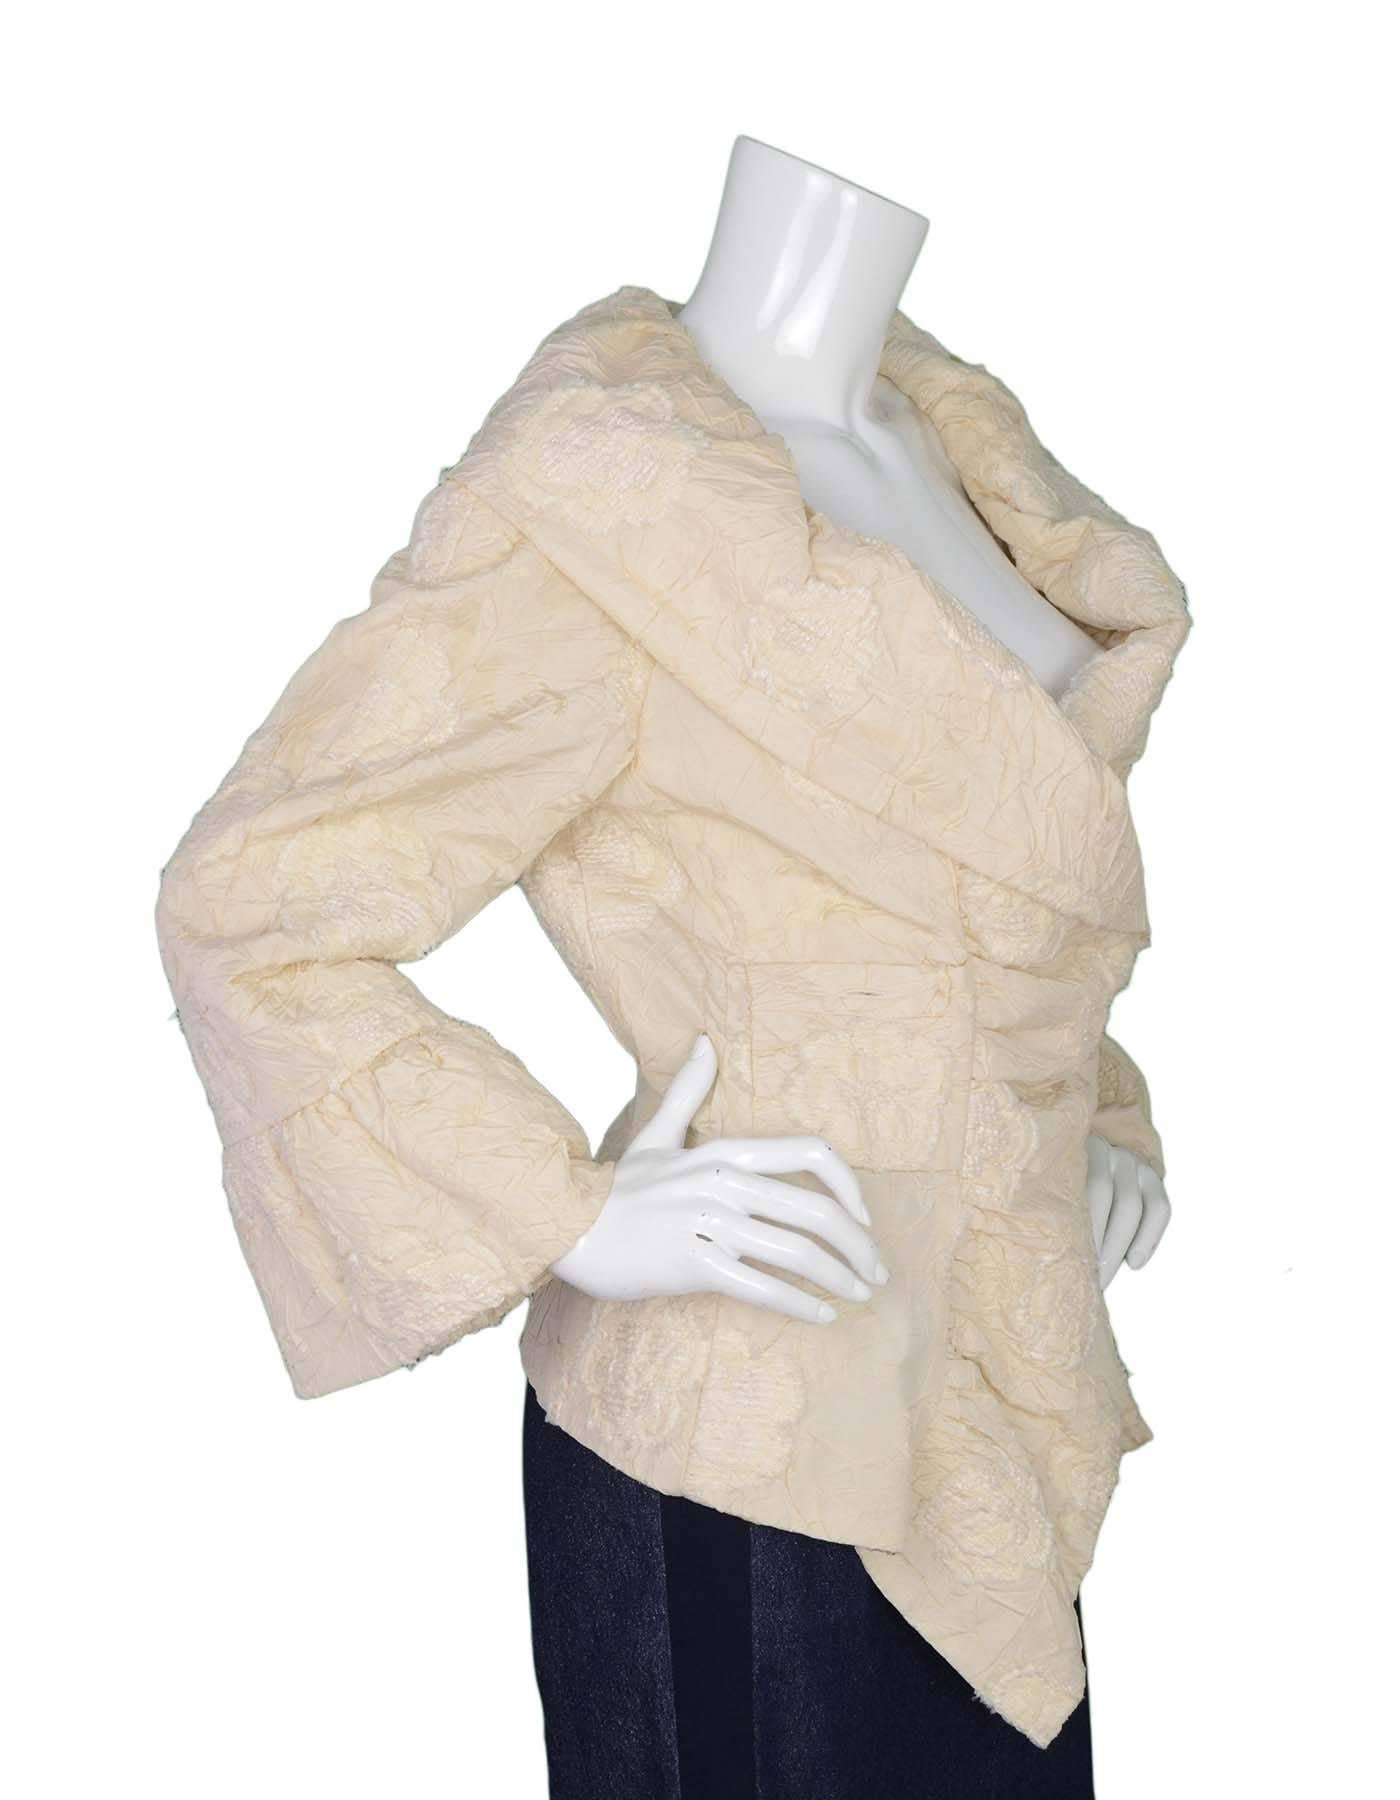 Chanel Textured Silk Jacket 
Features floral textured design throughout jacket as well as a shawl style collar and asymmetrical hemline
Made In: France
Year of Production: 2006
Color: Ivory
Composition: 60% silk, 20% polyester, 15% nylon, 5%